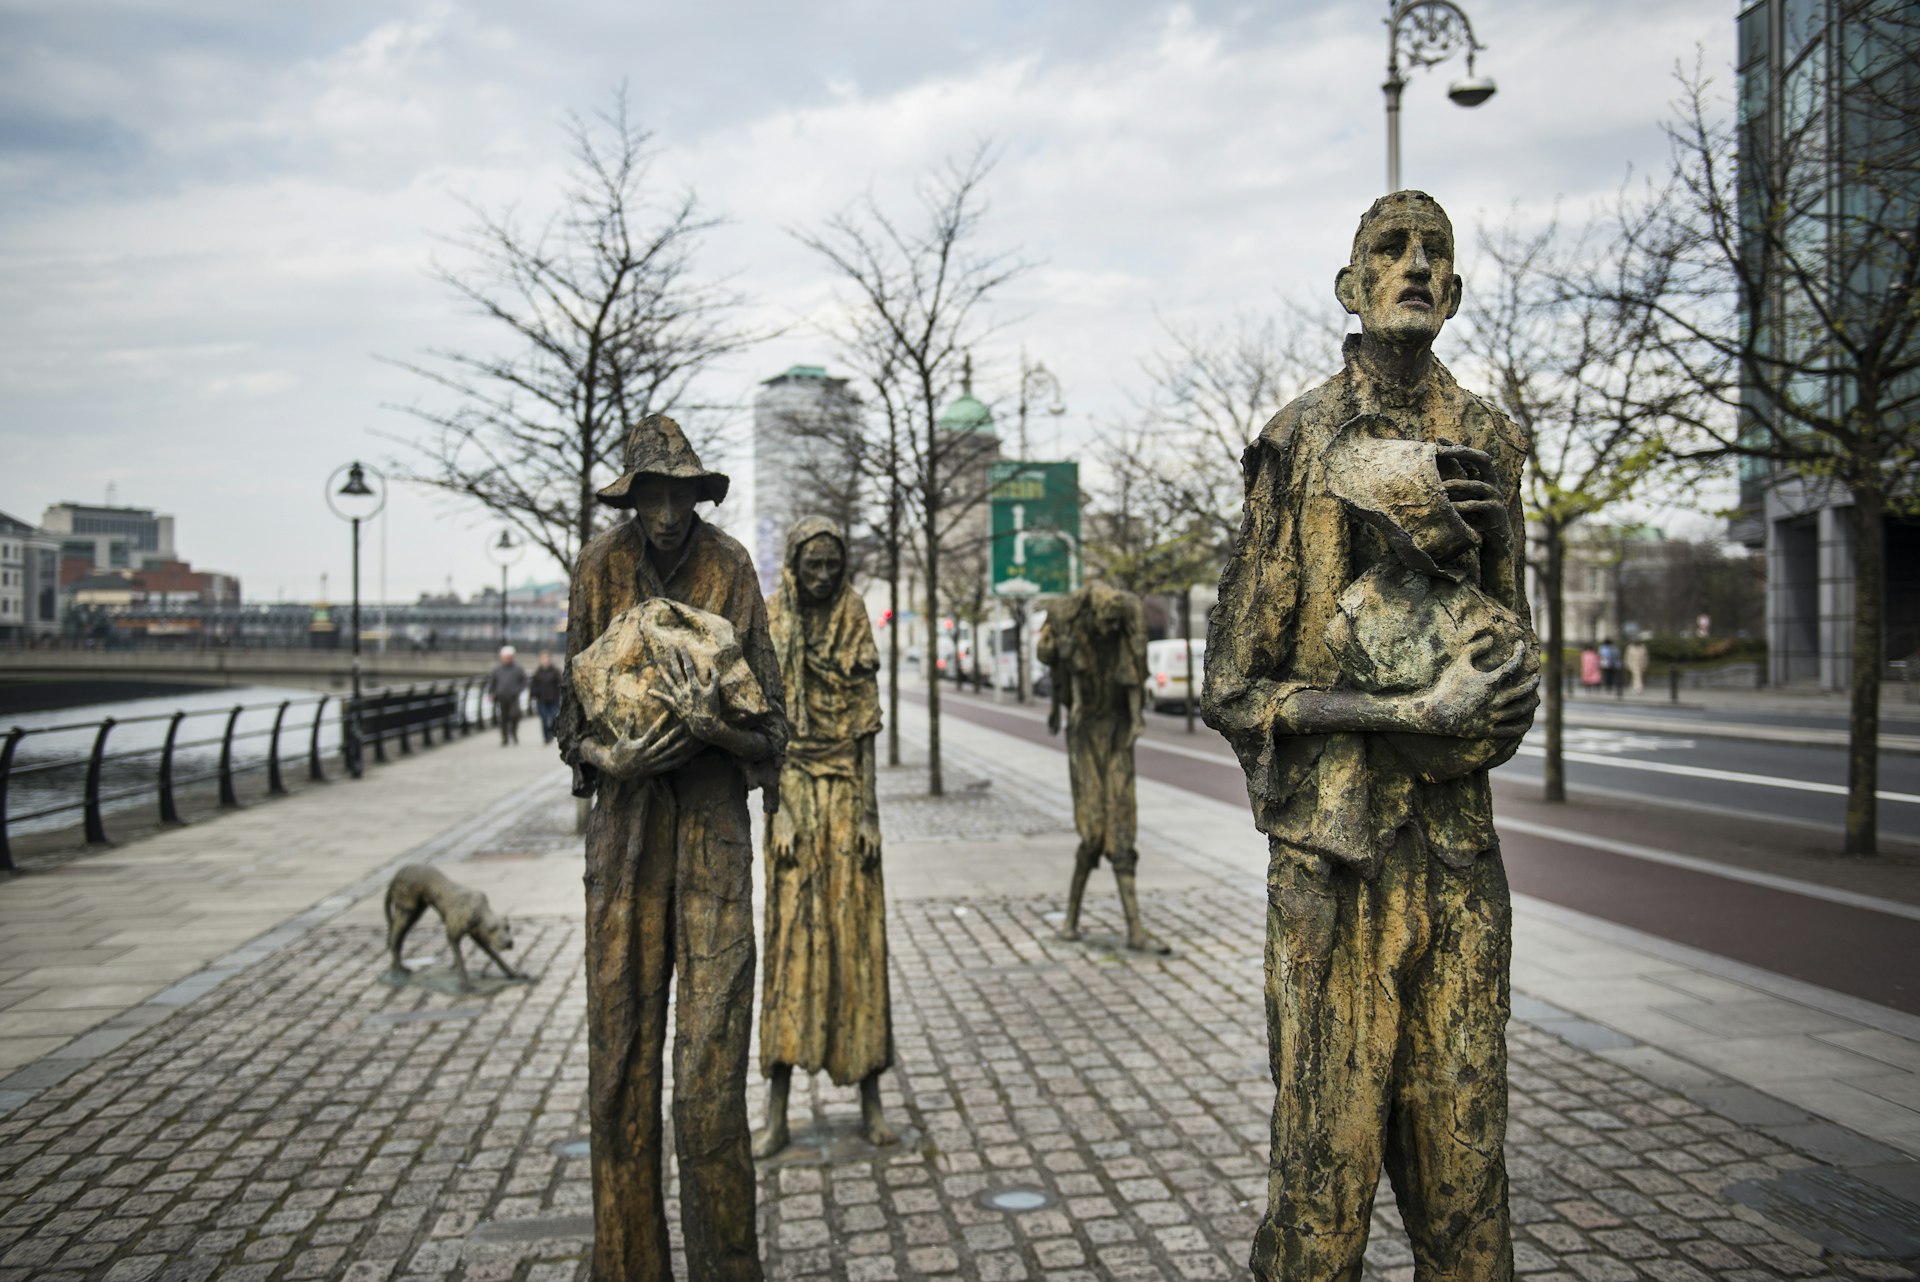 The Great Famine or Great Hunger monument, Dublin, Ireland